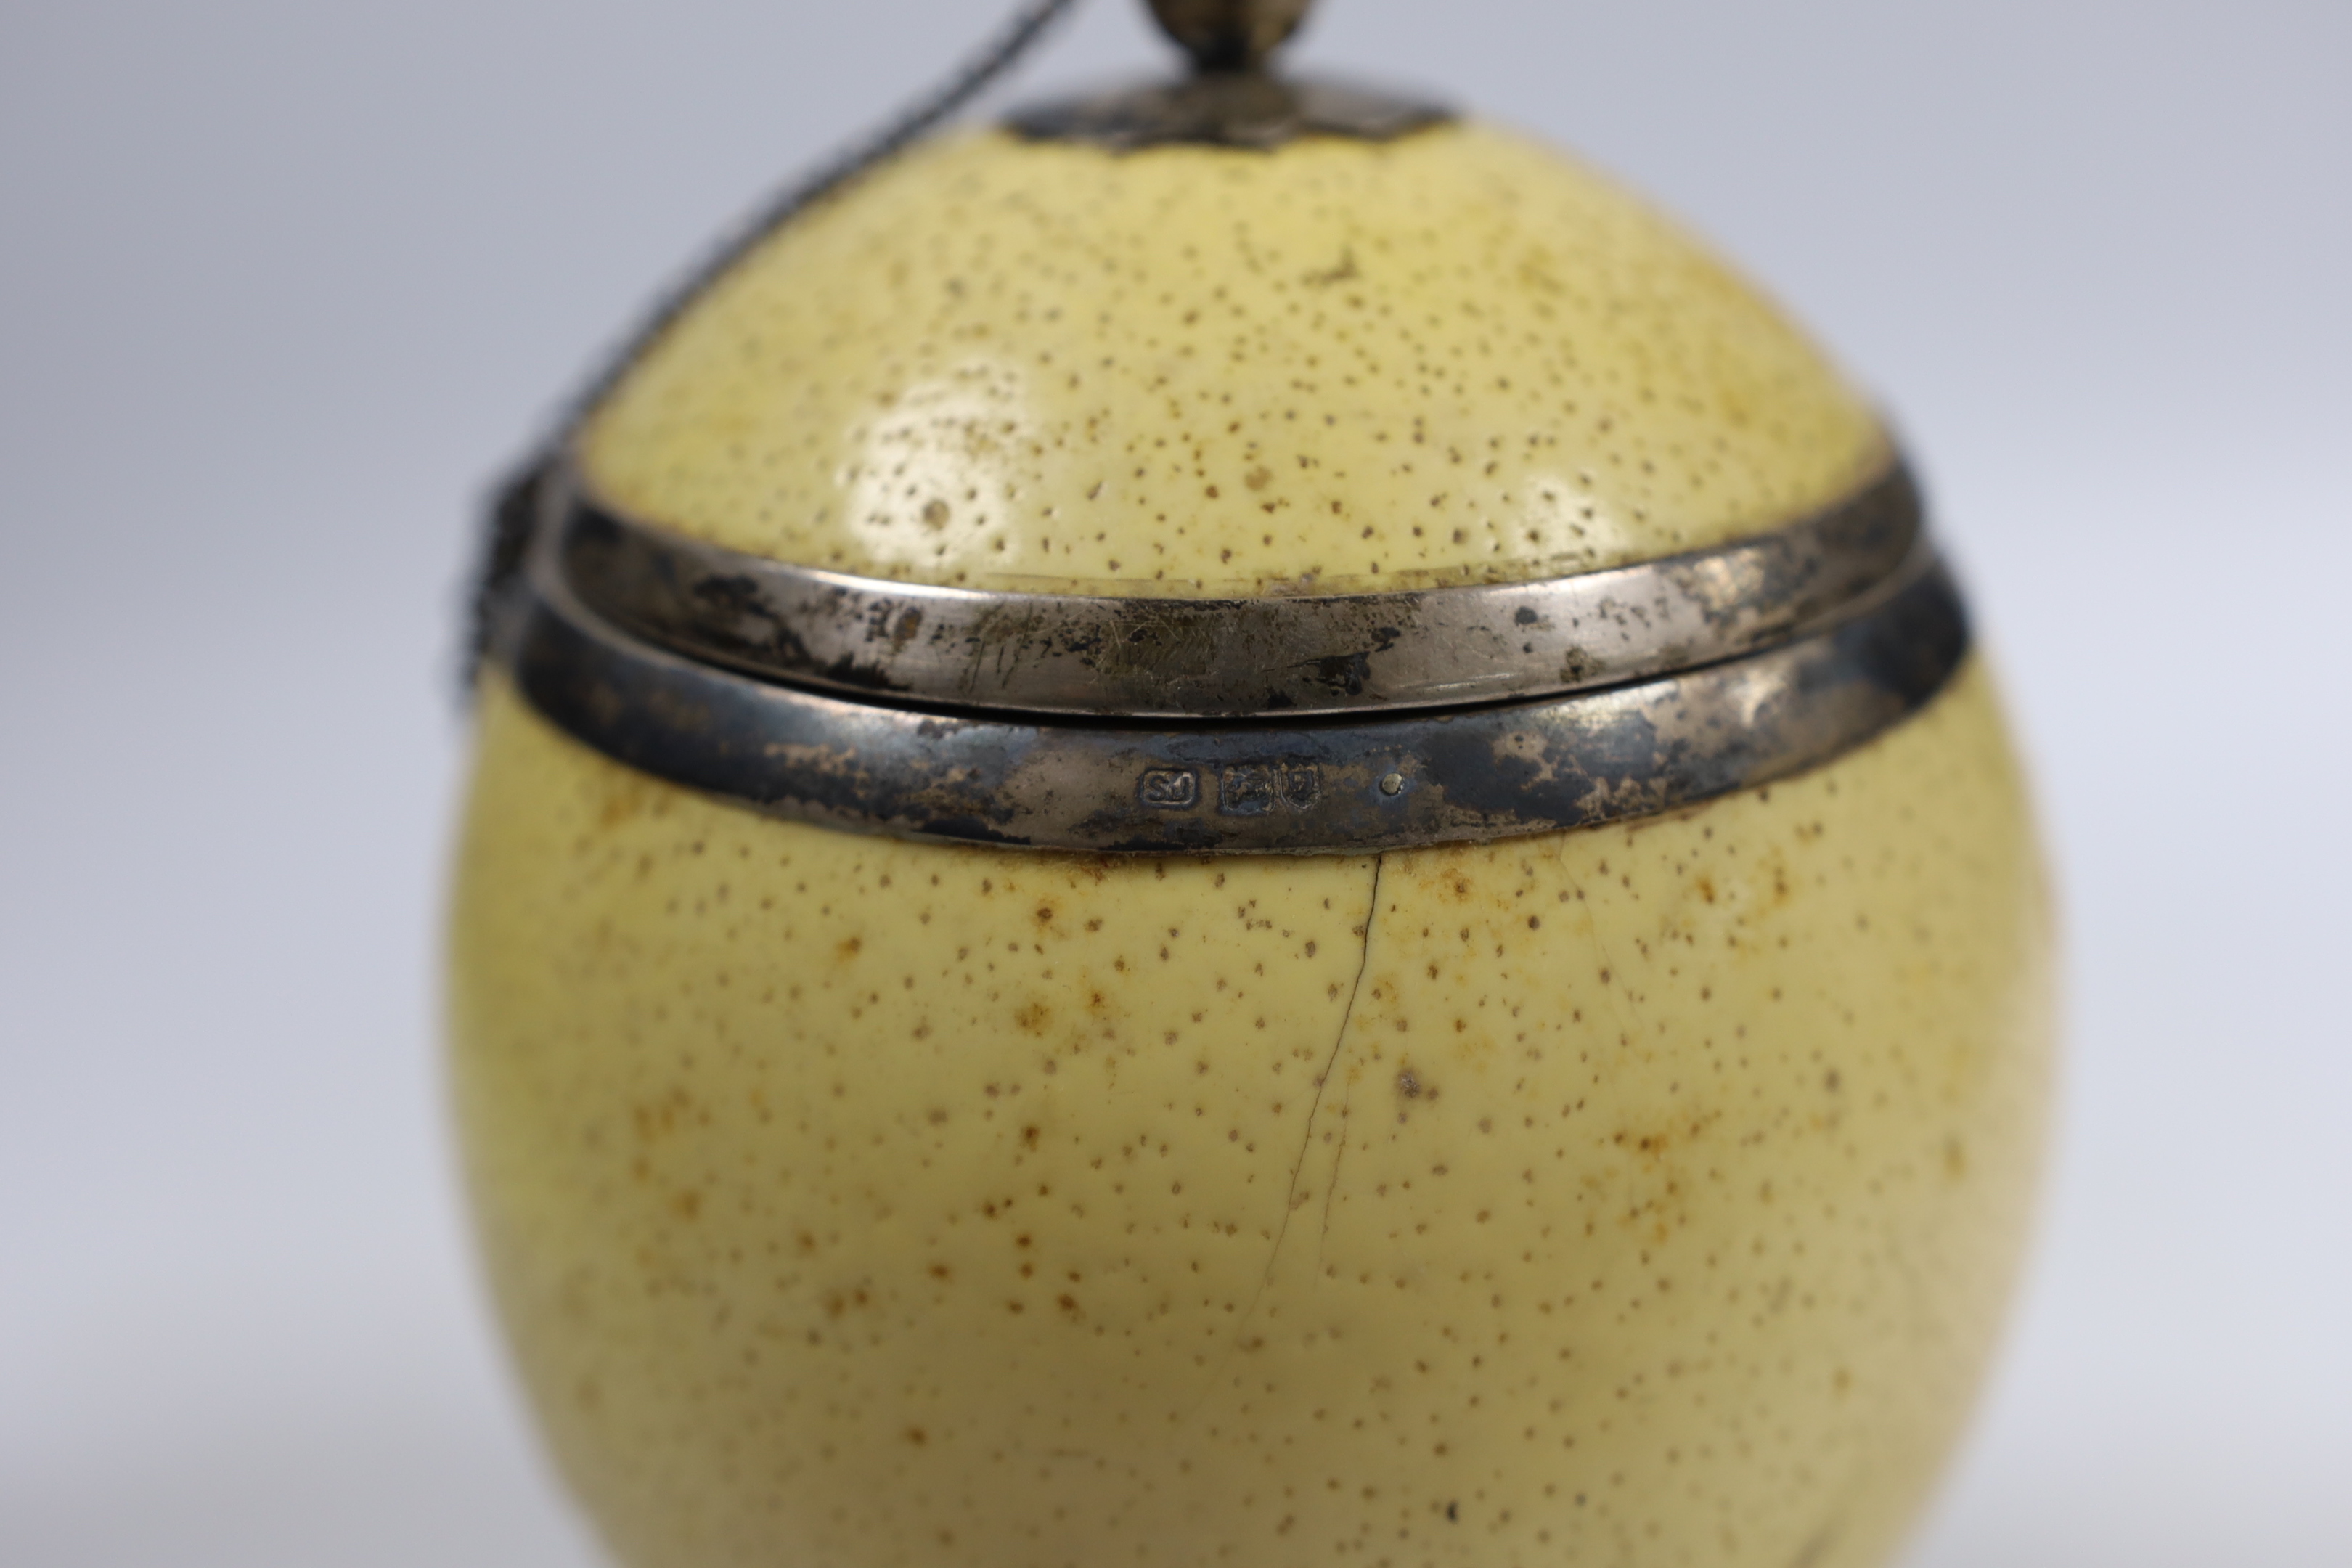 A cased Edwardian silver mounted ostrich egg, with silver mounted cover, Samuel Jacob, London, 1907, housed in a leather and watered silk case, 18.6cm.